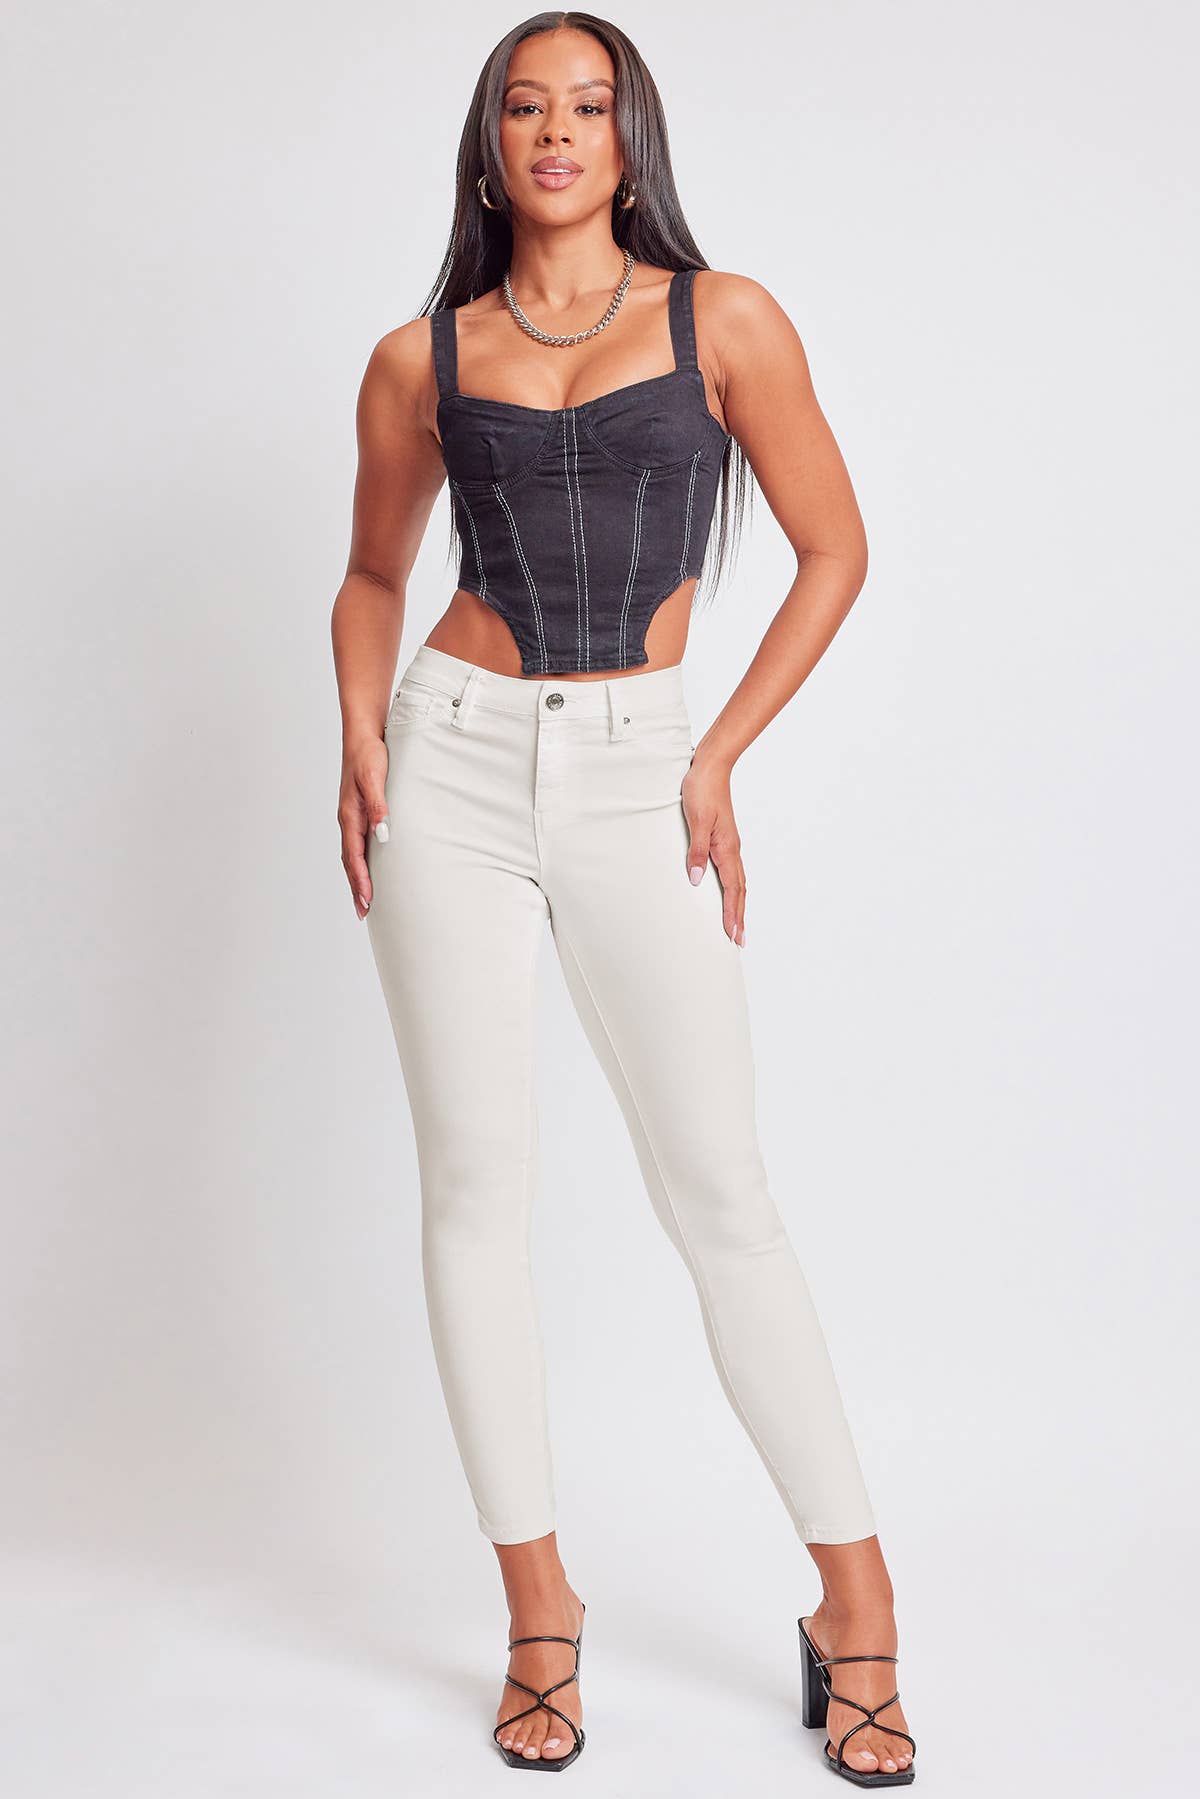 Shell Pink Hyperstretch Mid-Rise Skinny Jean